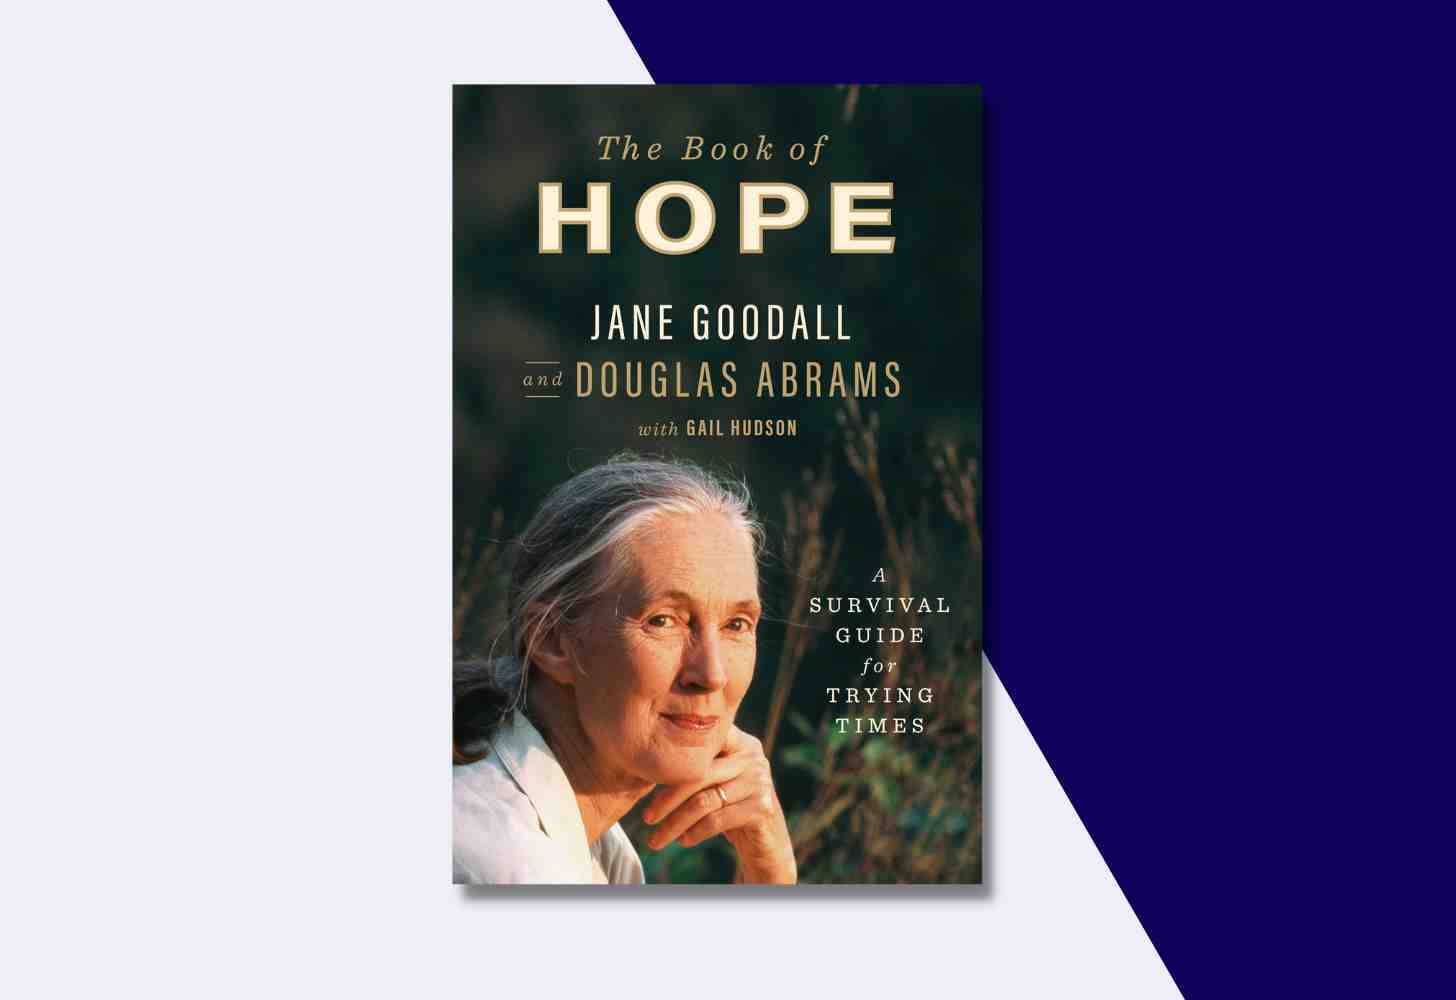 The Cover Of: “The Book of Hope: A Survival Guide for Trying Times” by Douglas Abrams and Jane Goodall